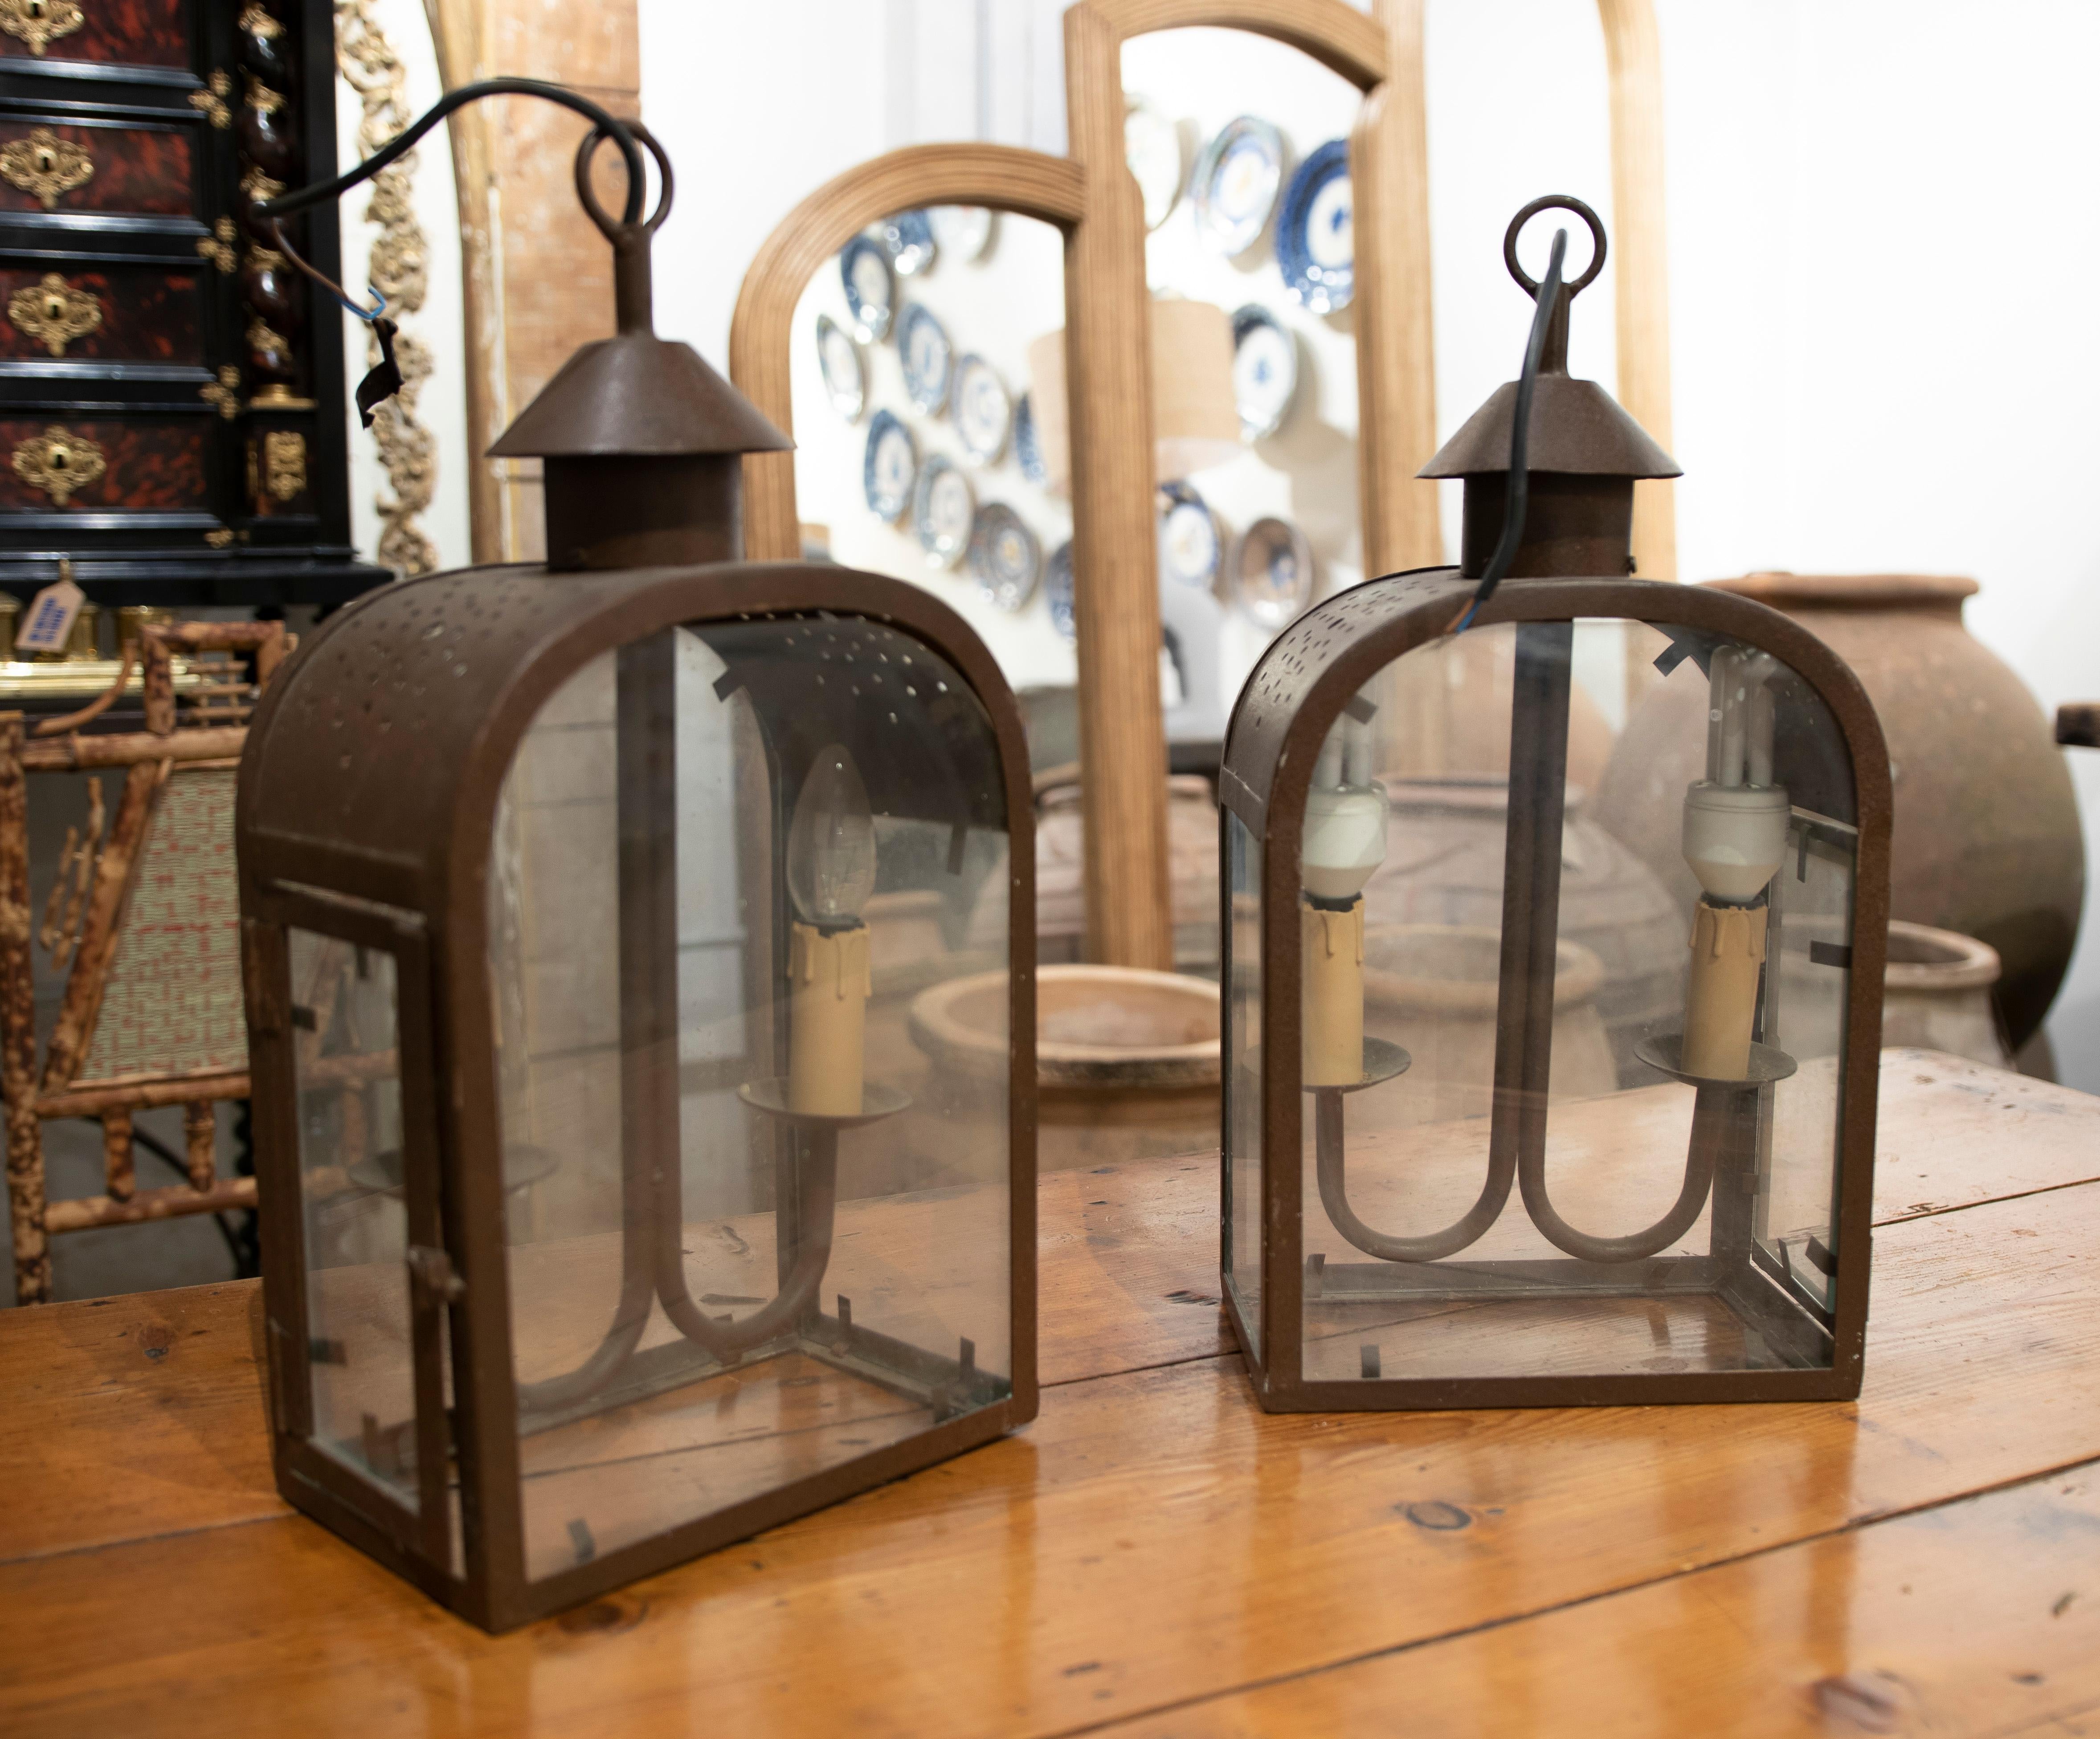 Pair of iron lanterns with rust brown finish crystals.